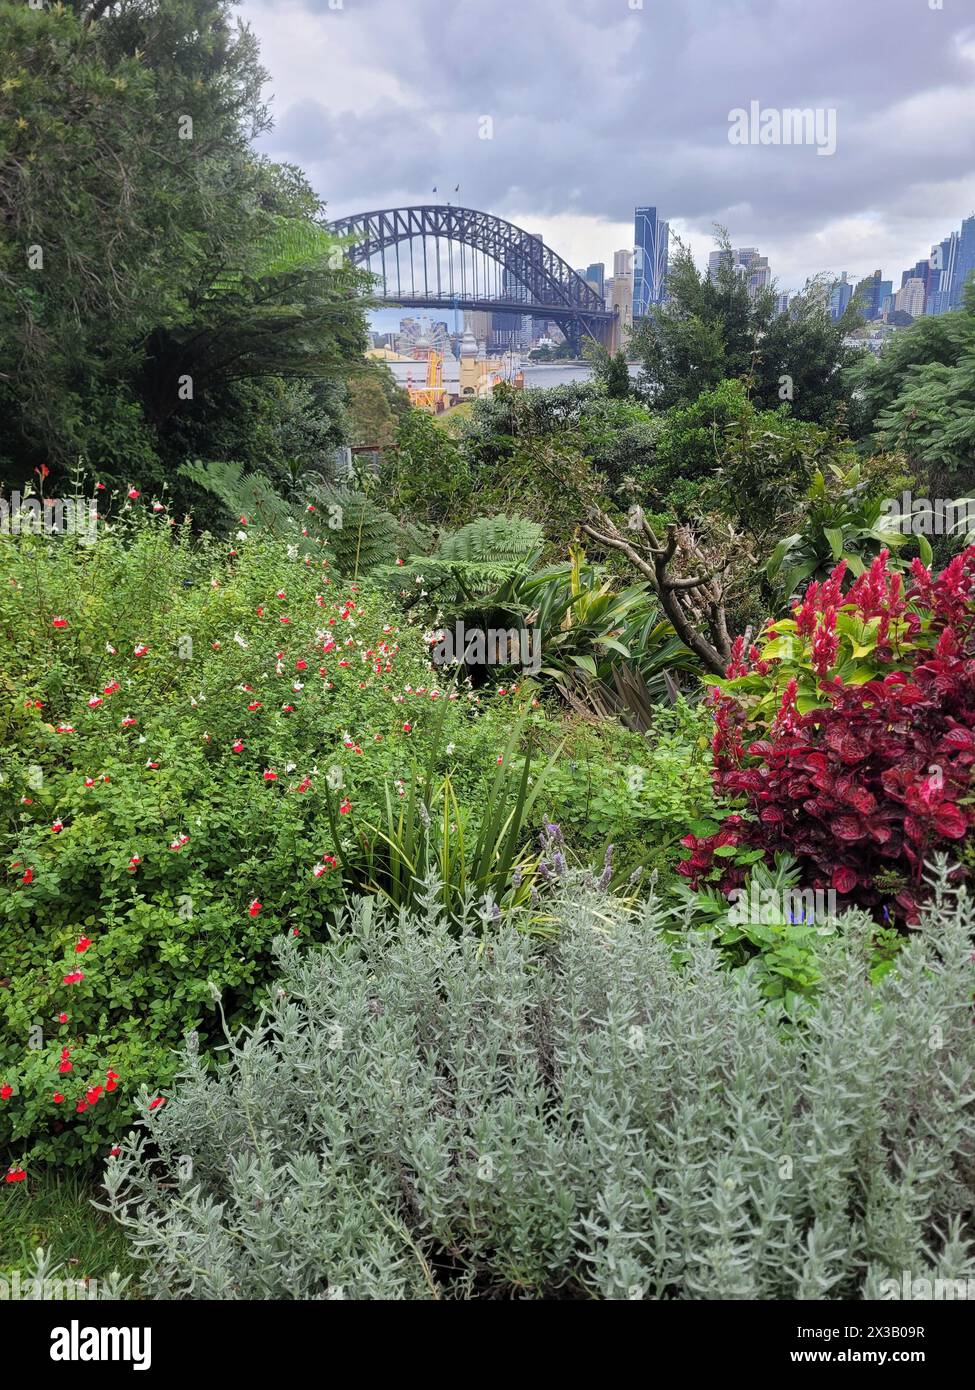 Sydney harbour bridge in the background of a native plant garden on a cloudy overcast day. Stock Photo